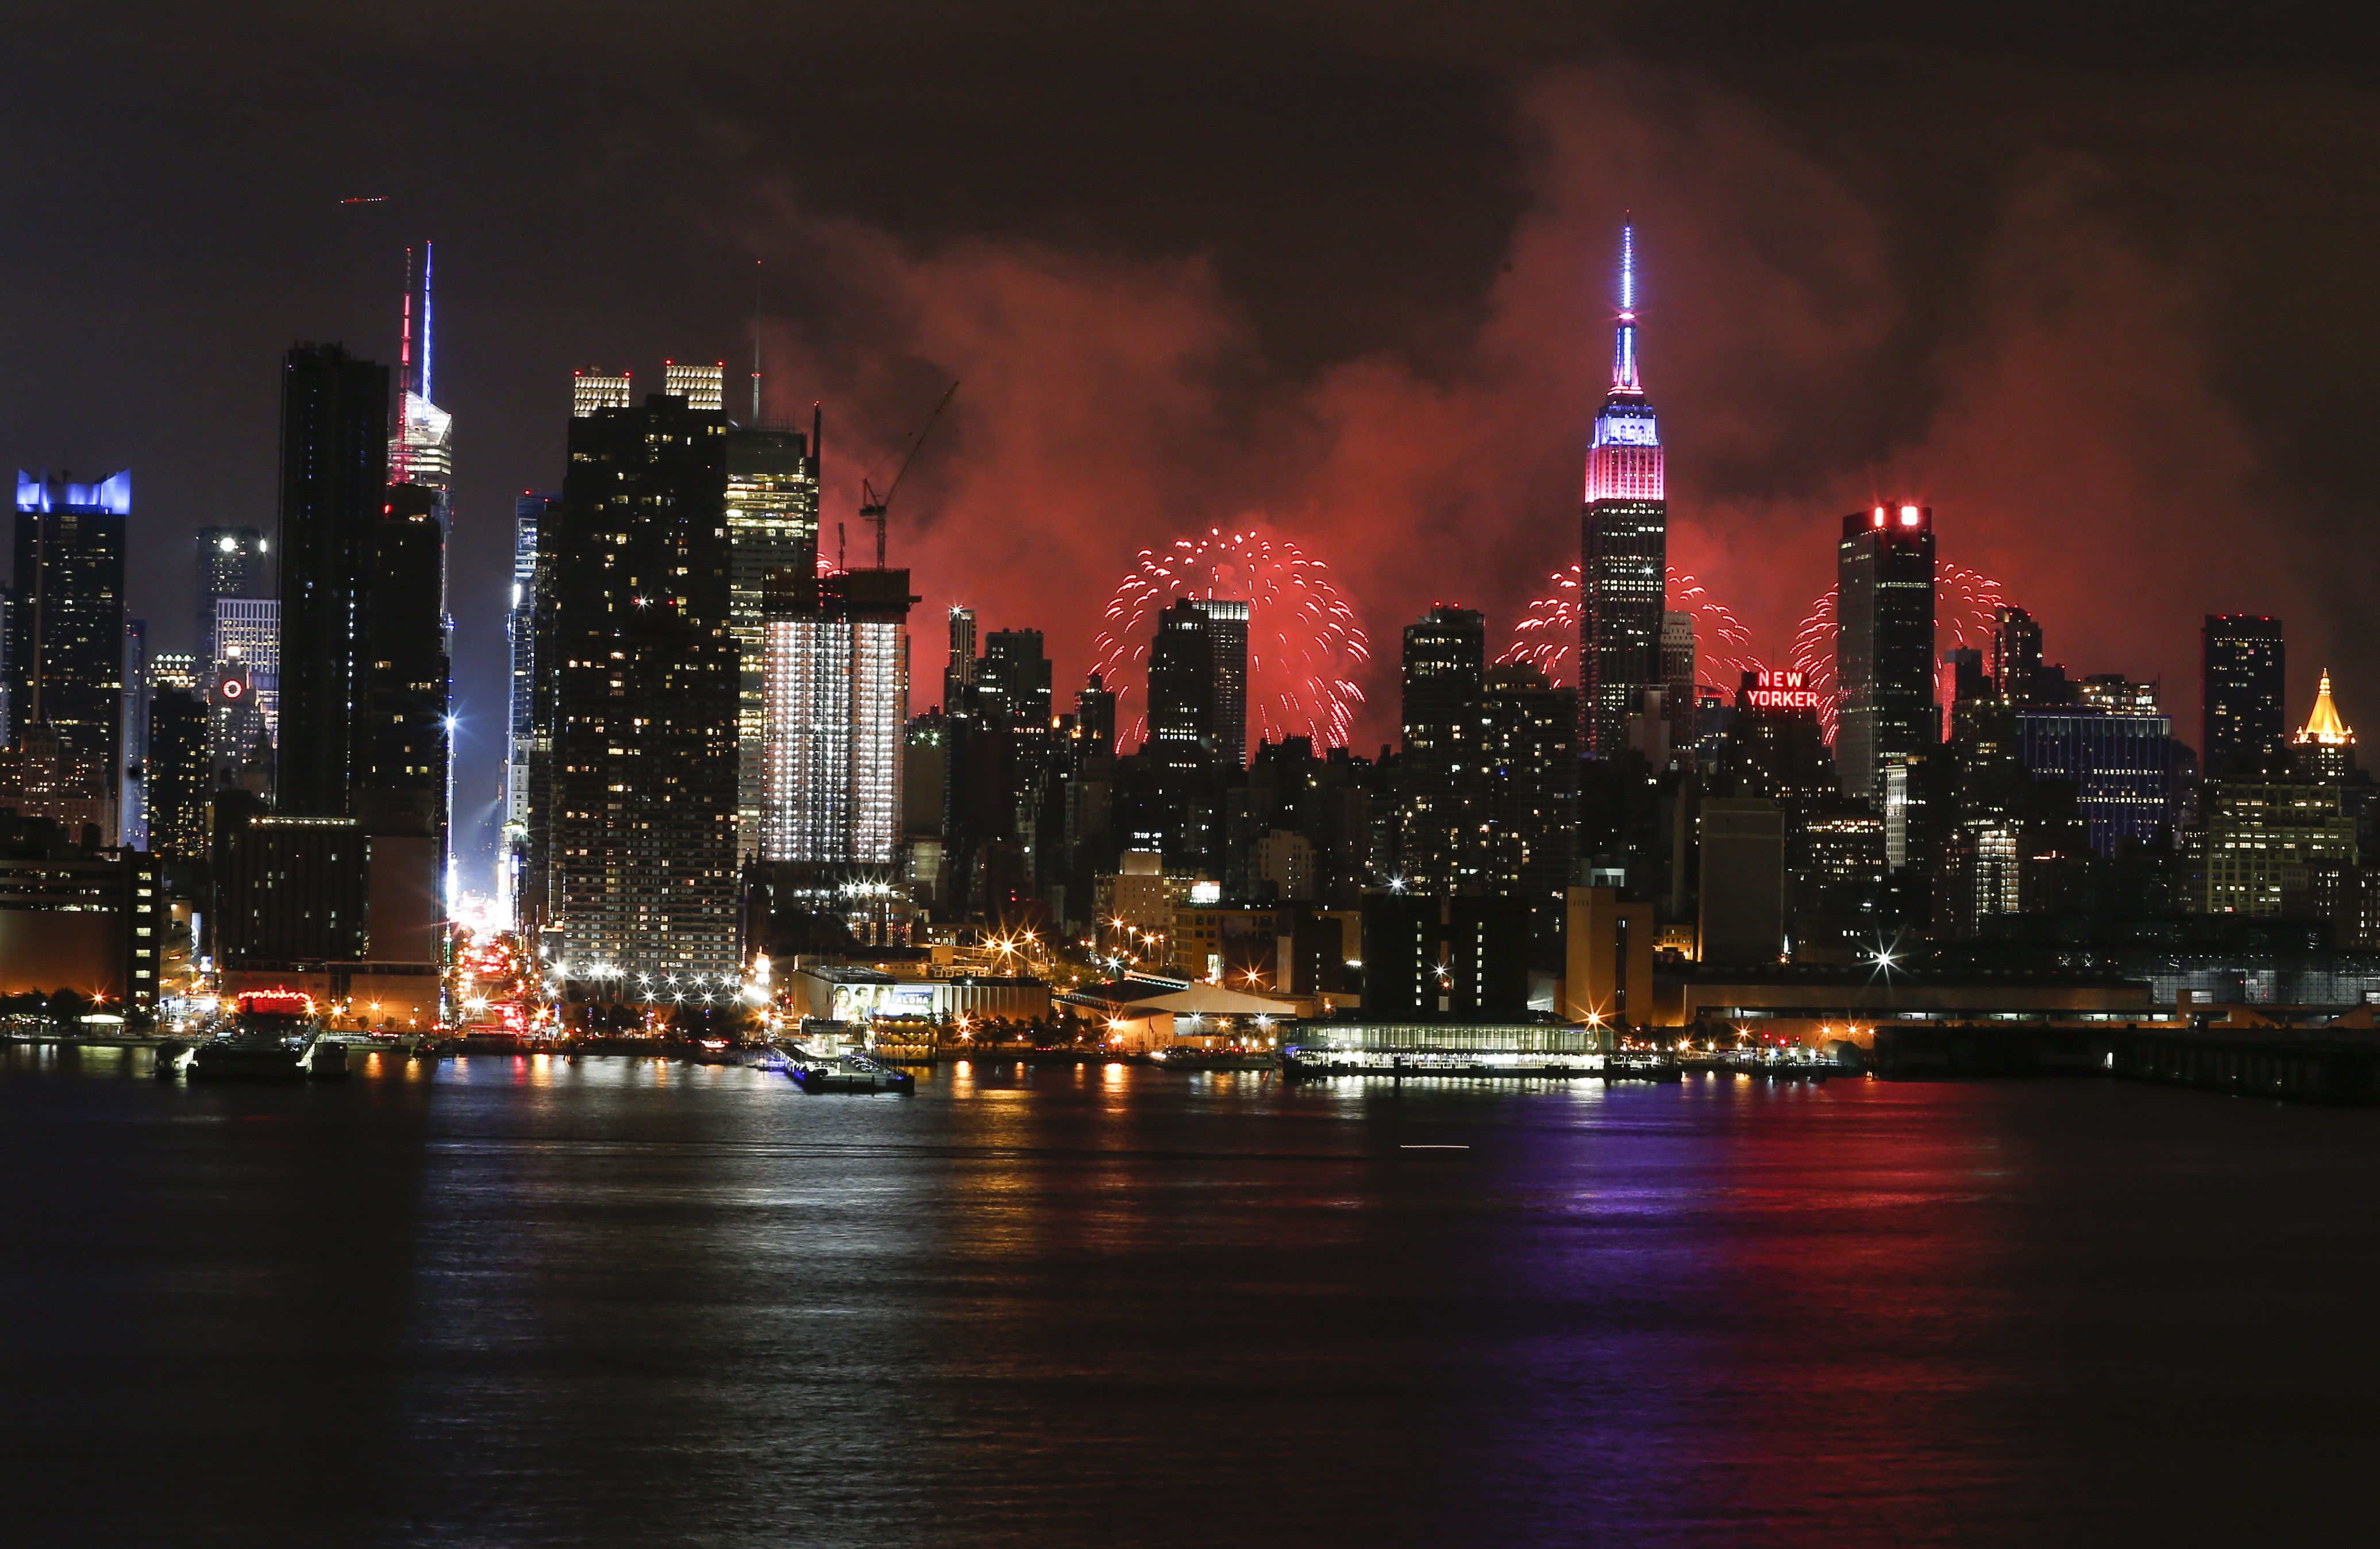 Fireworks light up the New York City skyline during 39th annual Macy's 4th of July fireworks for Independence day as seen from Weehawken, New Jersey on July 4, 2015 . (Credit: Kena Betancur/ AFP/Getty Images)